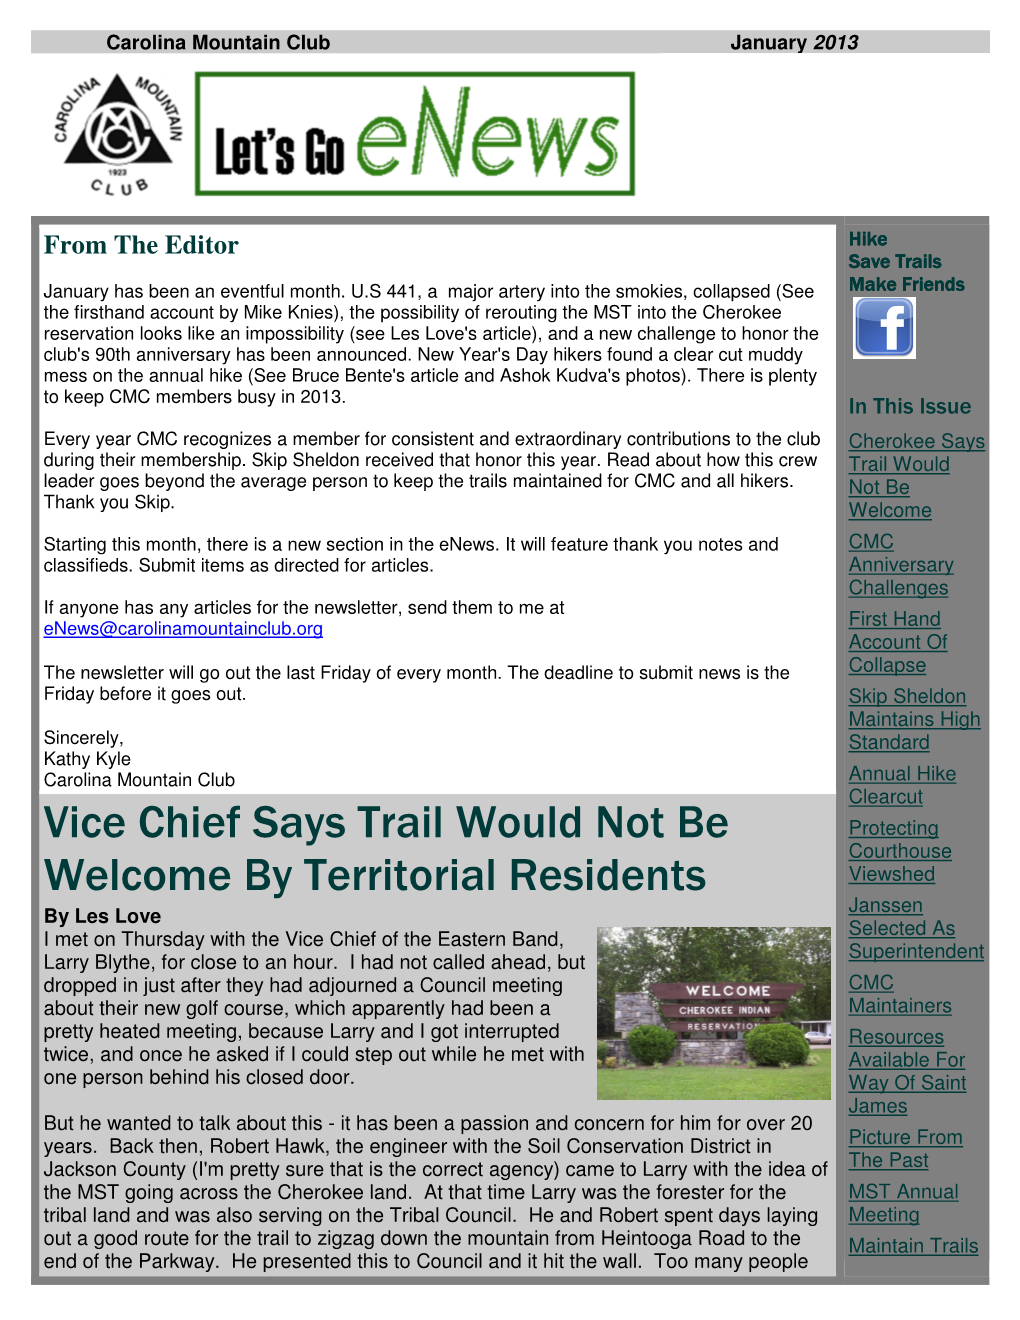 Vice Chief Says Trail Would Not Be Welcome